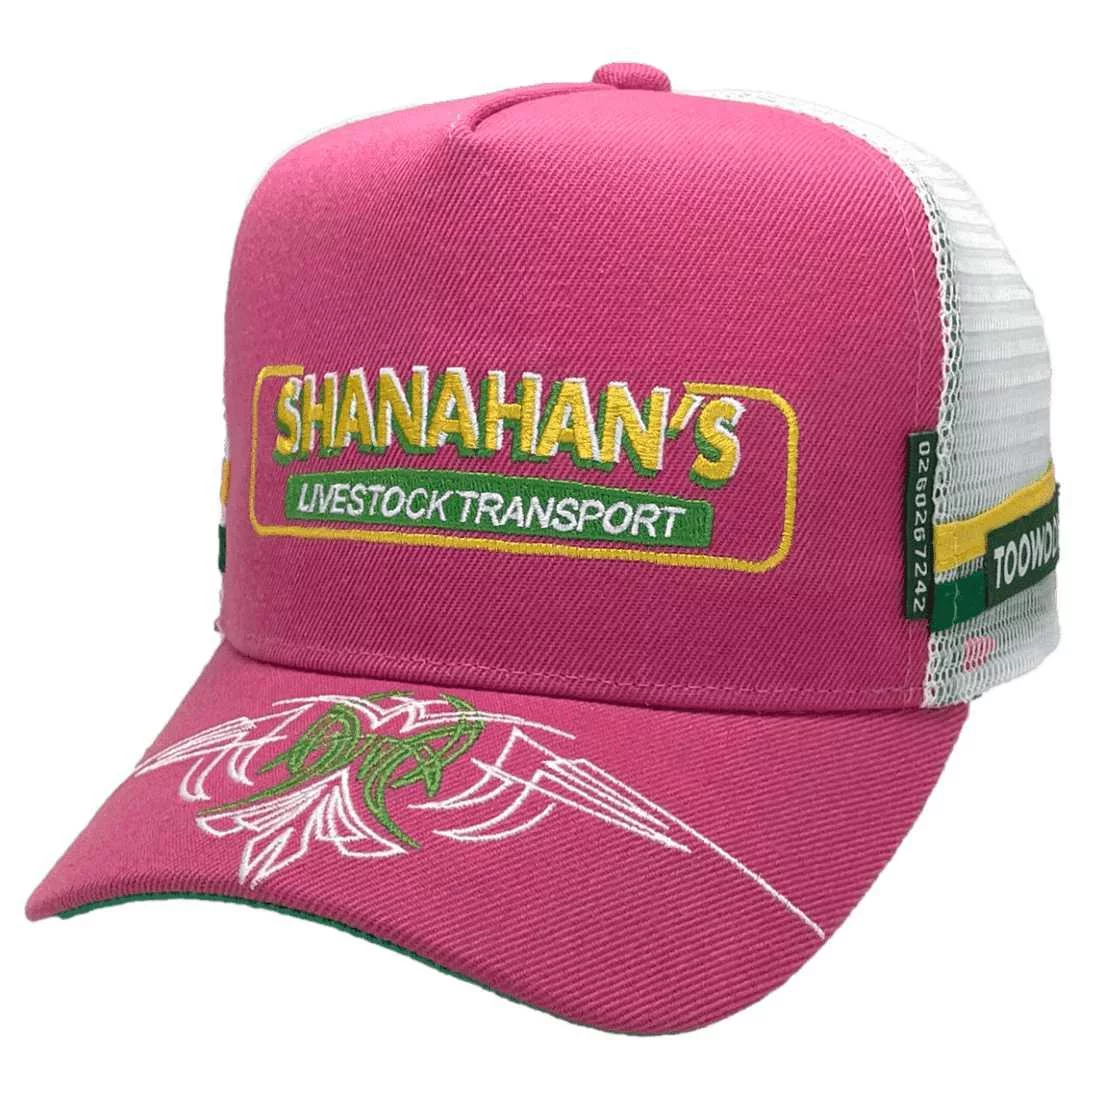 Shanahans Livestock Transport Wodonga VIC and Toowoomba QLD HP Original Power Trucker Aussie Hat with Double Side Bands Pink